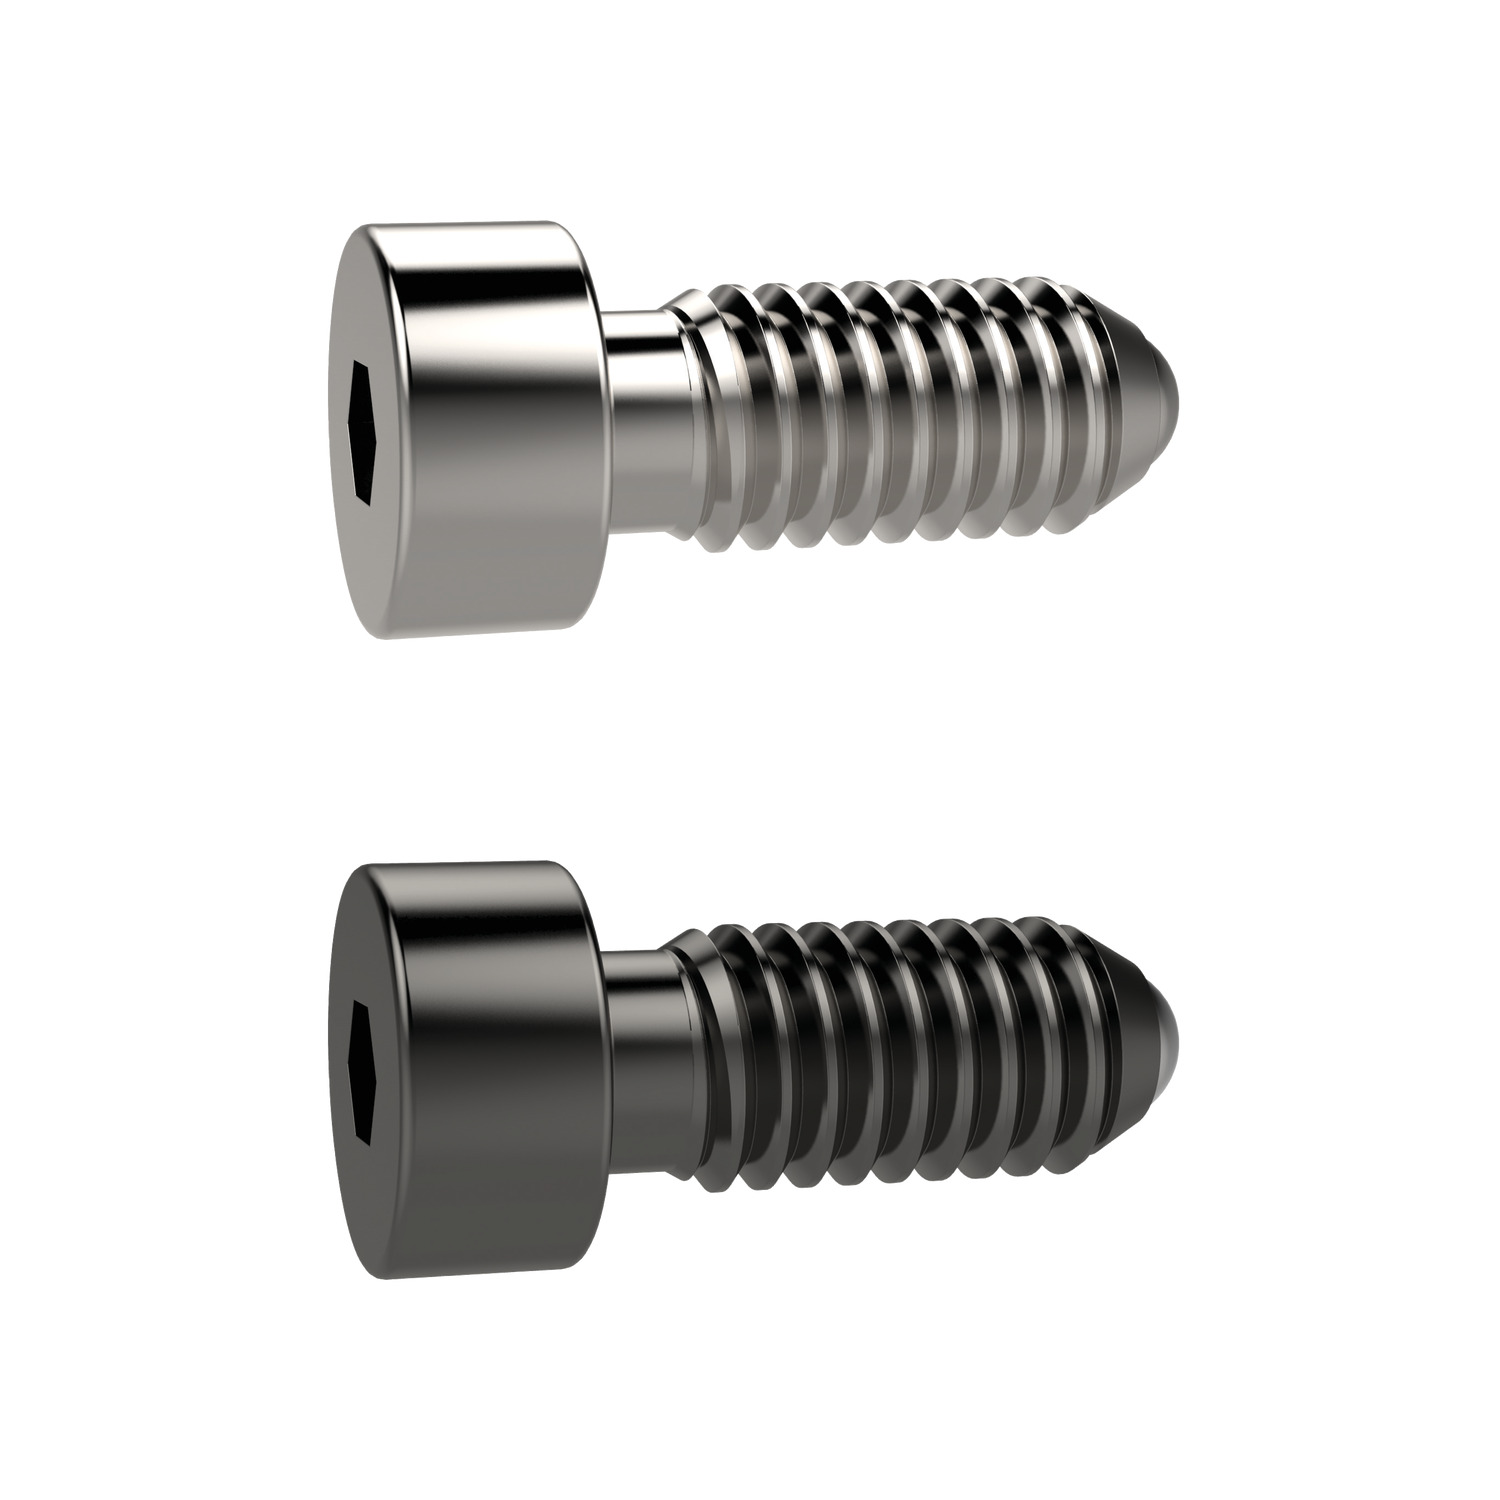 Spring Plungers Spring plungers with ball end & hex. socket- headed. Available in steel or stainless steel. Used for locating, applying pressure or lifting off. Special types available on request.